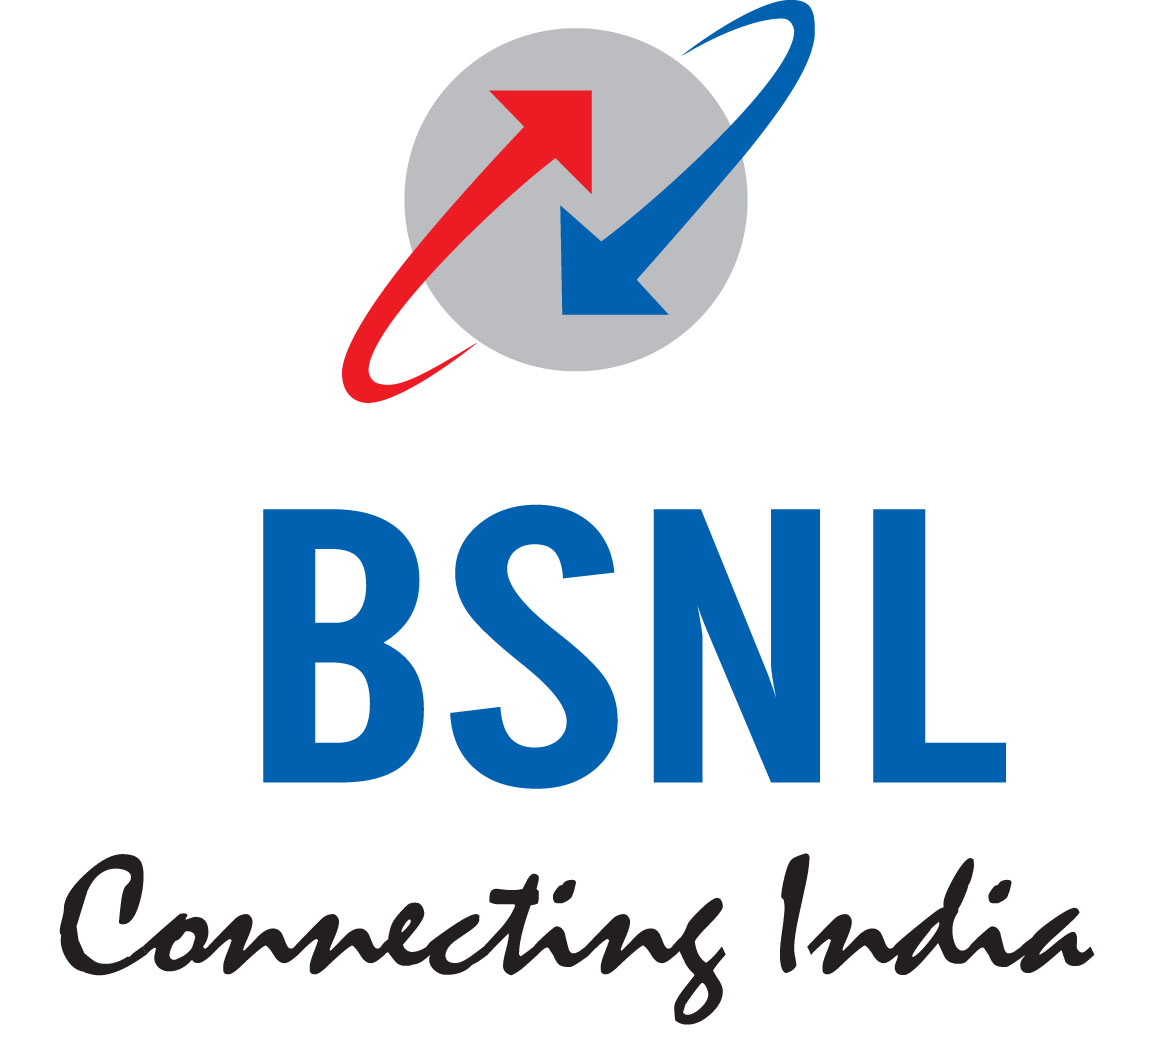 BSNL 3G Manual Setting For Android Phone Sony, Samsung, Micromax